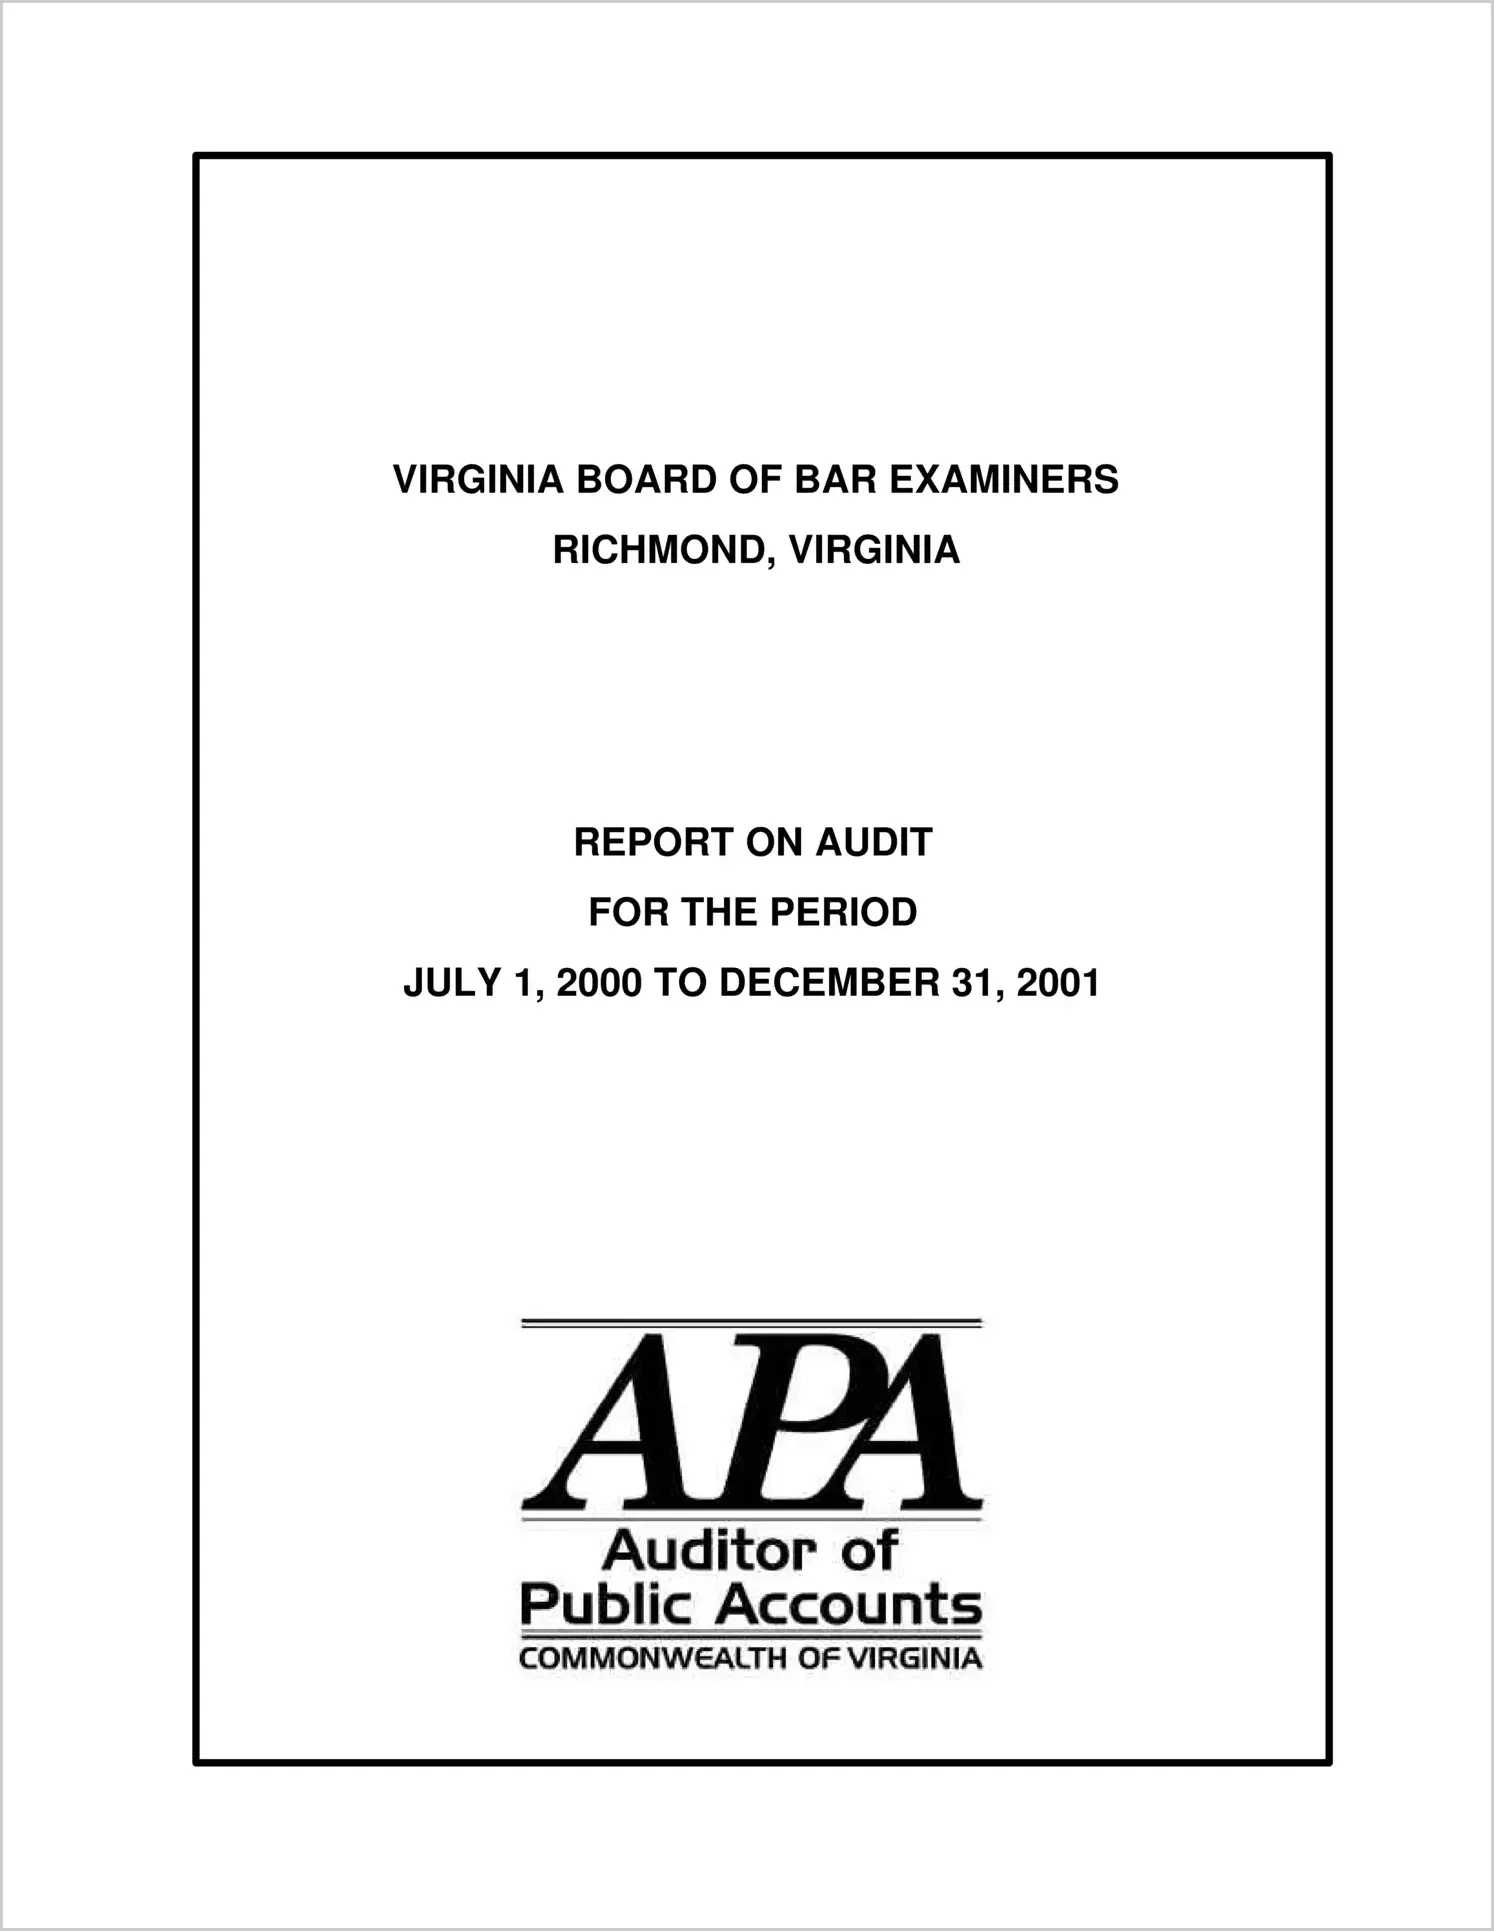 State Board of Bar Examiners for the period July 1, 2000 to December 31, 2001